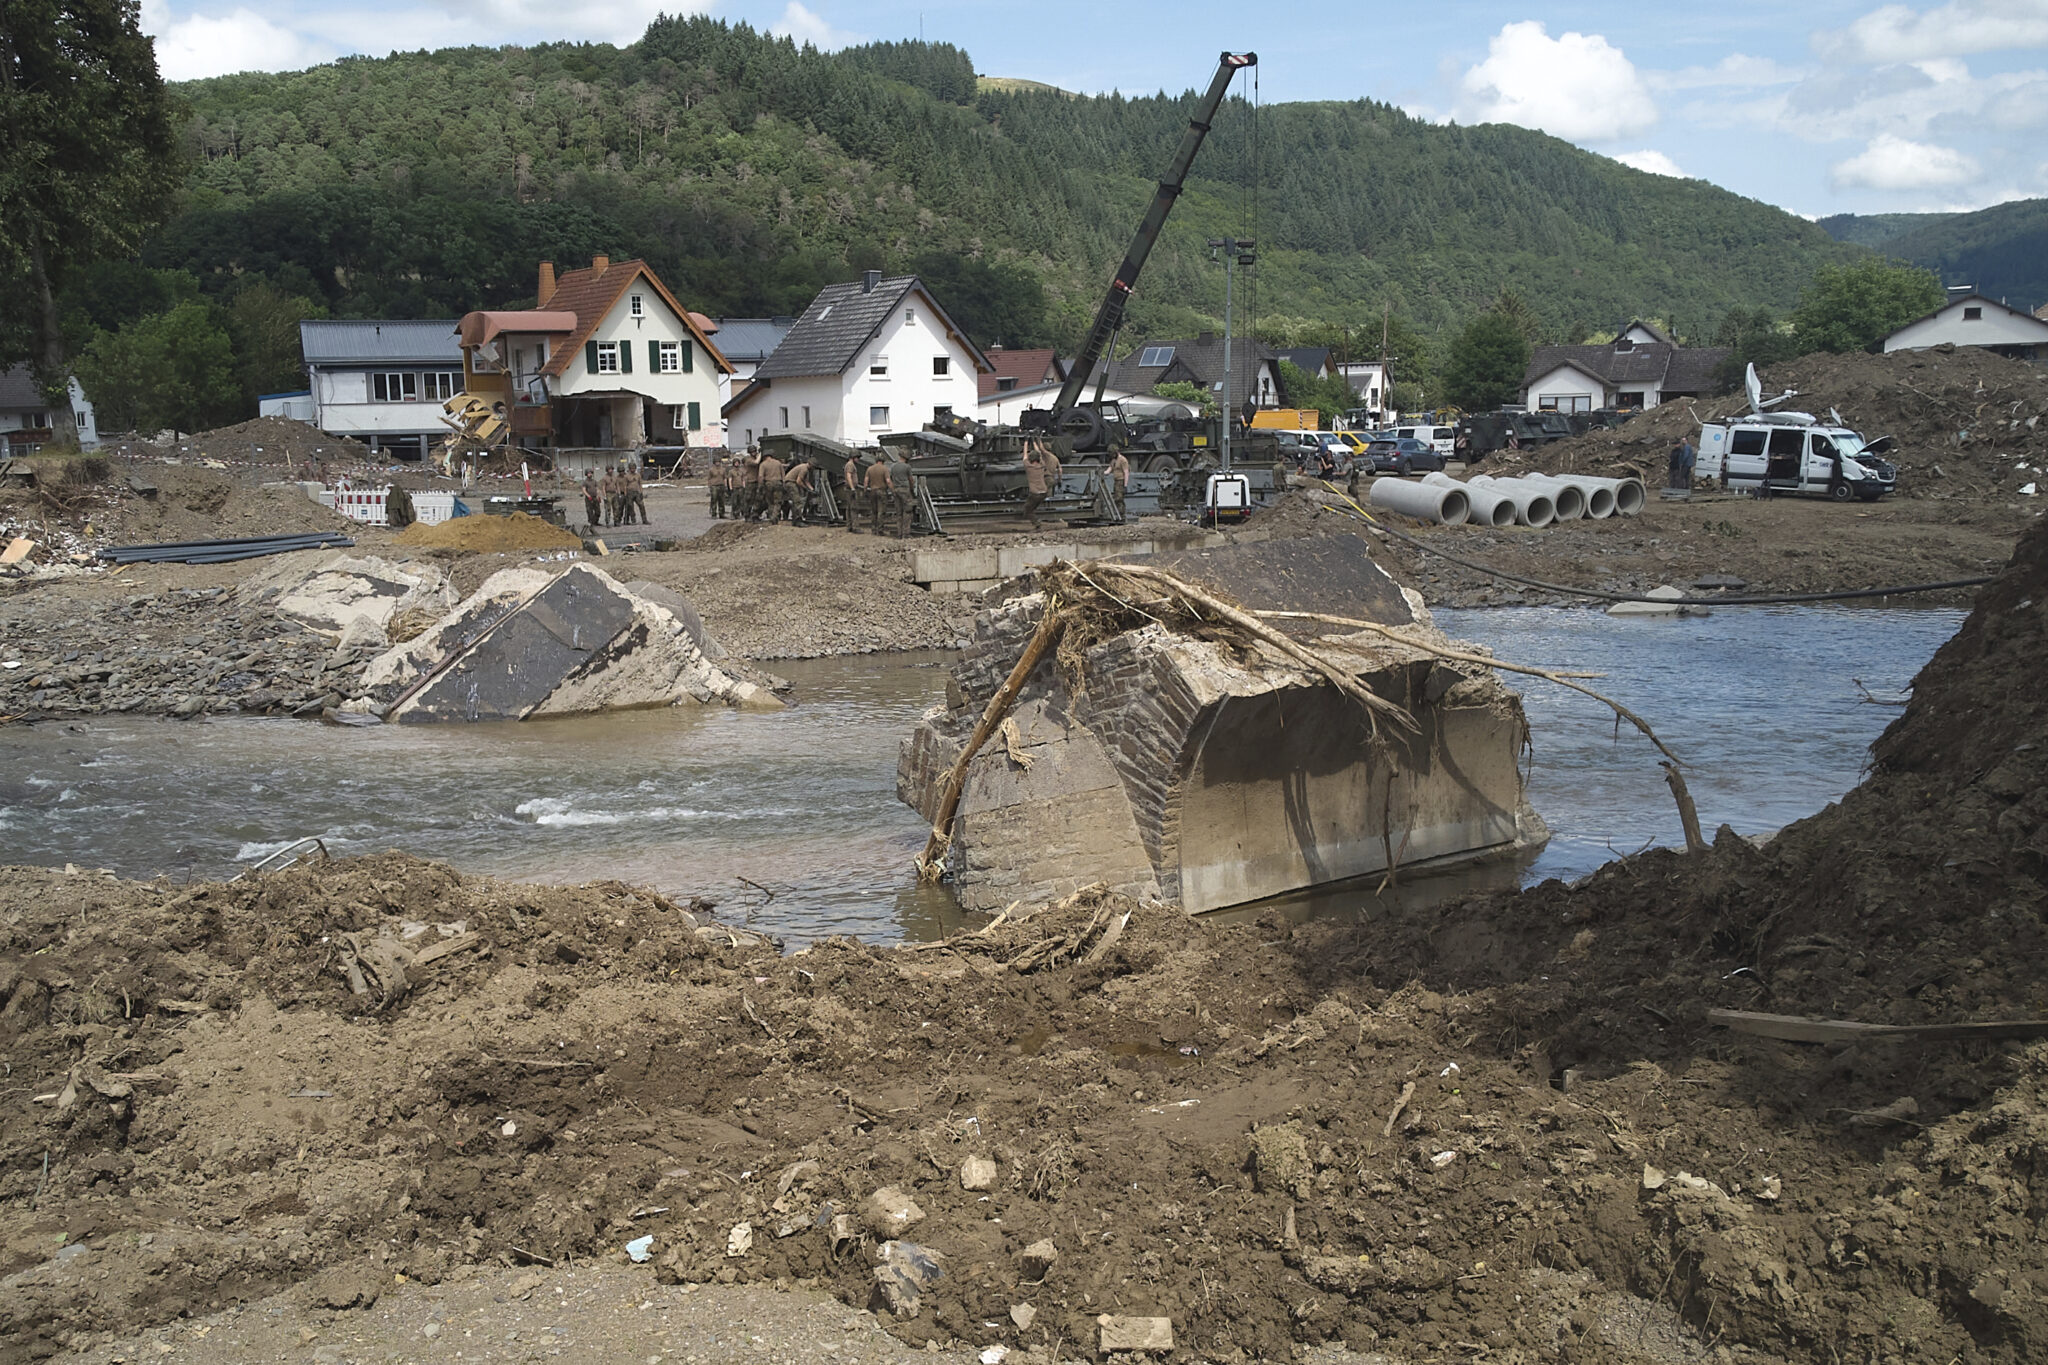 Insured Losses from July Floods in Germany Could Approach 6B AIR